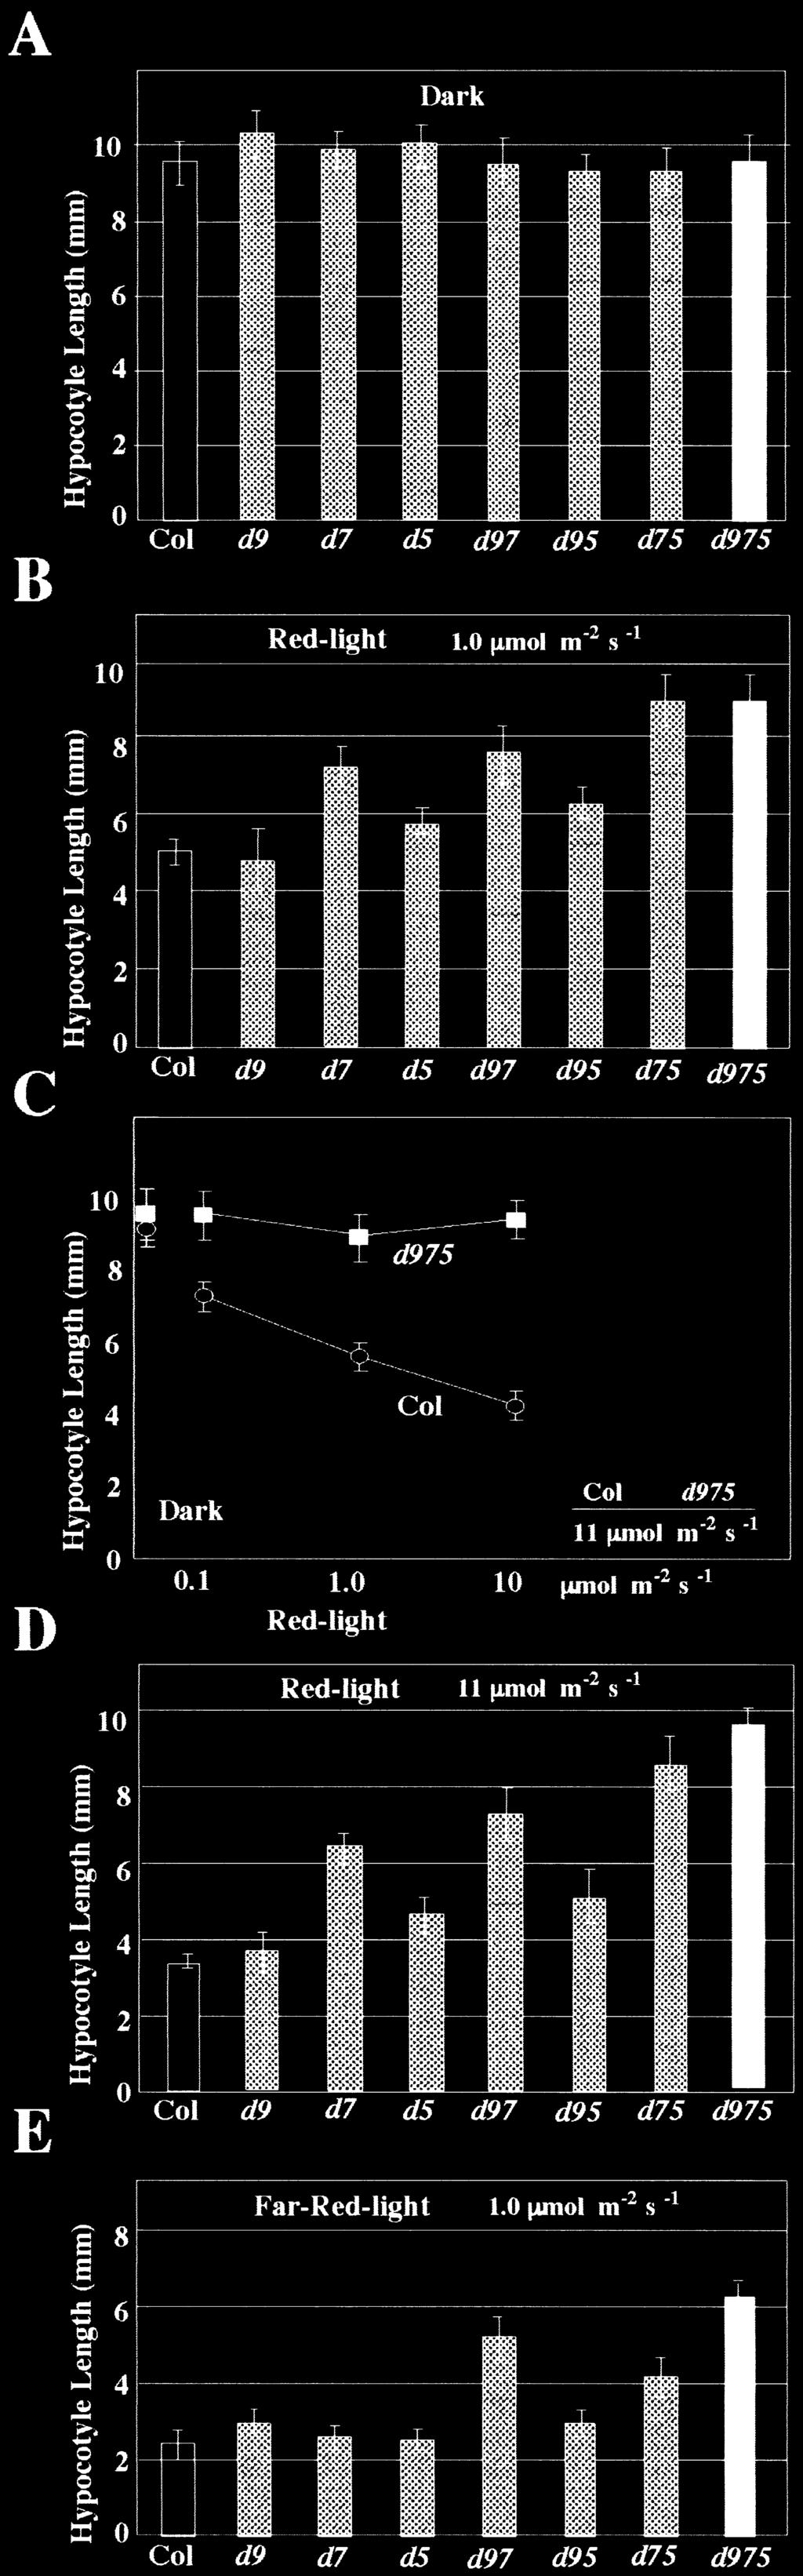 2003, Murakami et al. 2004). The set of mutant seeds were sowed on soil, and then they were grown under the long-day (16 h light/8 h dark cycle) and short-day (10 h light/14 h dark cycle) conditions.